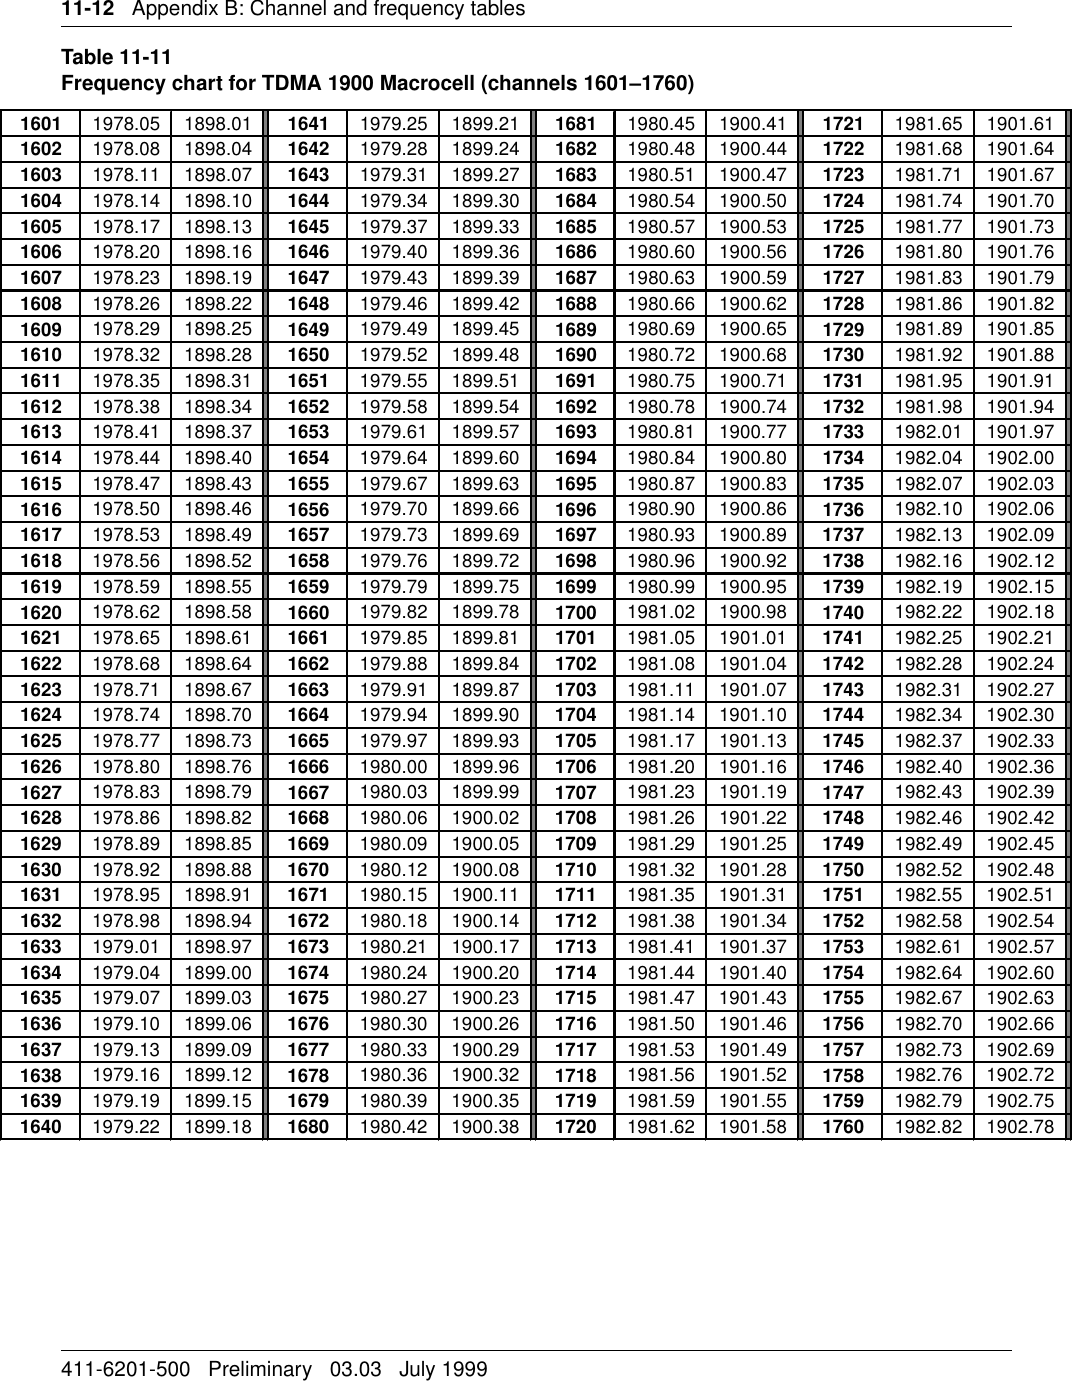 11-12   Appendix B: Channel and frequency tables411-6201-500   Preliminary   03.03   July 1999Table 11-11Frequency chart for TDMA 1900 Macrocell (channels 1601–1760)1601 1978.05 1898.01 1641 1979.25 1899.21 1681 1980.45 1900.41 1721 1981.65 1901.611602 1978.08 1898.04 1642 1979.28 1899.24 1682 1980.48 1900.44 1722 1981.68 1901.641603 1978.11 1898.07 1643 1979.31 1899.27 1683 1980.51 1900.47 1723 1981.71 1901.671604 1978.14 1898.10 1644 1979.34 1899.30 1684 1980.54 1900.50 1724 1981.74 1901.701605 1978.17 1898.13 1645 1979.37 1899.33 1685 1980.57 1900.53 1725 1981.77 1901.731606 1978.20 1898.16 1646 1979.40 1899.36 1686 1980.60 1900.56 1726 1981.80 1901.761607 1978.23 1898.19 1647 1979.43 1899.39 1687 1980.63 1900.59 1727 1981.83 1901.791608 1978.26 1898.22 1648 1979.46 1899.42 1688 1980.66 1900.62 1728 1981.86 1901.821609 1978.29 1898.25 1649 1979.49 1899.45 1689 1980.69 1900.65 1729 1981.89 1901.851610 1978.32 1898.28 1650 1979.52 1899.48 1690 1980.72 1900.68 1730 1981.92 1901.881611 1978.35 1898.31 1651 1979.55 1899.51 1691 1980.75 1900.71 1731 1981.95 1901.911612 1978.38 1898.34 1652 1979.58 1899.54 1692 1980.78 1900.74 1732 1981.98 1901.941613 1978.41 1898.37 1653 1979.61 1899.57 1693 1980.81 1900.77 1733 1982.01 1901.971614 1978.44 1898.40 1654 1979.64 1899.60 1694 1980.84 1900.80 1734 1982.04 1902.001615 1978.47 1898.43 1655 1979.67 1899.63 1695 1980.87 1900.83 1735 1982.07 1902.031616 1978.50 1898.46 1656 1979.70 1899.66 1696 1980.90 1900.86 1736 1982.10 1902.061617 1978.53 1898.49 1657 1979.73 1899.69 1697 1980.93 1900.89 1737 1982.13 1902.091618 1978.56 1898.52 1658 1979.76 1899.72 1698 1980.96 1900.92 1738 1982.16 1902.121619 1978.59 1898.55 1659 1979.79 1899.75 1699 1980.99 1900.95 1739 1982.19 1902.151620 1978.62 1898.58 1660 1979.82 1899.78 1700 1981.02 1900.98 1740 1982.22 1902.181621 1978.65 1898.61 1661 1979.85 1899.81 1701 1981.05 1901.01 1741 1982.25 1902.211622 1978.68 1898.64 1662 1979.88 1899.84 1702 1981.08 1901.04 1742 1982.28 1902.241623 1978.71 1898.67 1663 1979.91 1899.87 1703 1981.11 1901.07 1743 1982.31 1902.271624 1978.74 1898.70 1664 1979.94 1899.90 1704 1981.14 1901.10 1744 1982.34 1902.301625 1978.77 1898.73 1665 1979.97 1899.93 1705 1981.17 1901.13 1745 1982.37 1902.331626 1978.80 1898.76 1666 1980.00 1899.96 1706 1981.20 1901.16 1746 1982.40 1902.361627 1978.83 1898.79 1667 1980.03 1899.99 1707 1981.23 1901.19 1747 1982.43 1902.391628 1978.86 1898.82 1668 1980.06 1900.02 1708 1981.26 1901.22 1748 1982.46 1902.421629 1978.89 1898.85 1669 1980.09 1900.05 1709 1981.29 1901.25 1749 1982.49 1902.451630 1978.92 1898.88 1670 1980.12 1900.08 1710 1981.32 1901.28 1750 1982.52 1902.481631 1978.95 1898.91 1671 1980.15 1900.11 1711 1981.35 1901.31 1751 1982.55 1902.511632 1978.98 1898.94 1672 1980.18 1900.14 1712 1981.38 1901.34 1752 1982.58 1902.541633 1979.01 1898.97 1673 1980.21 1900.17 1713 1981.41 1901.37 1753 1982.61 1902.571634 1979.04 1899.00 1674 1980.24 1900.20 1714 1981.44 1901.40 1754 1982.64 1902.601635 1979.07 1899.03 1675 1980.27 1900.23 1715 1981.47 1901.43 1755 1982.67 1902.631636 1979.10 1899.06 1676 1980.30 1900.26 1716 1981.50 1901.46 1756 1982.70 1902.661637 1979.13 1899.09 1677 1980.33 1900.29 1717 1981.53 1901.49 1757 1982.73 1902.691638 1979.16 1899.12 1678 1980.36 1900.32 1718 1981.56 1901.52 1758 1982.76 1902.721639 1979.19 1899.15 1679 1980.39 1900.35 1719 1981.59 1901.55 1759 1982.79 1902.751640 1979.22 1899.18 1680 1980.42 1900.38 1720 1981.62 1901.58 1760 1982.82 1902.78